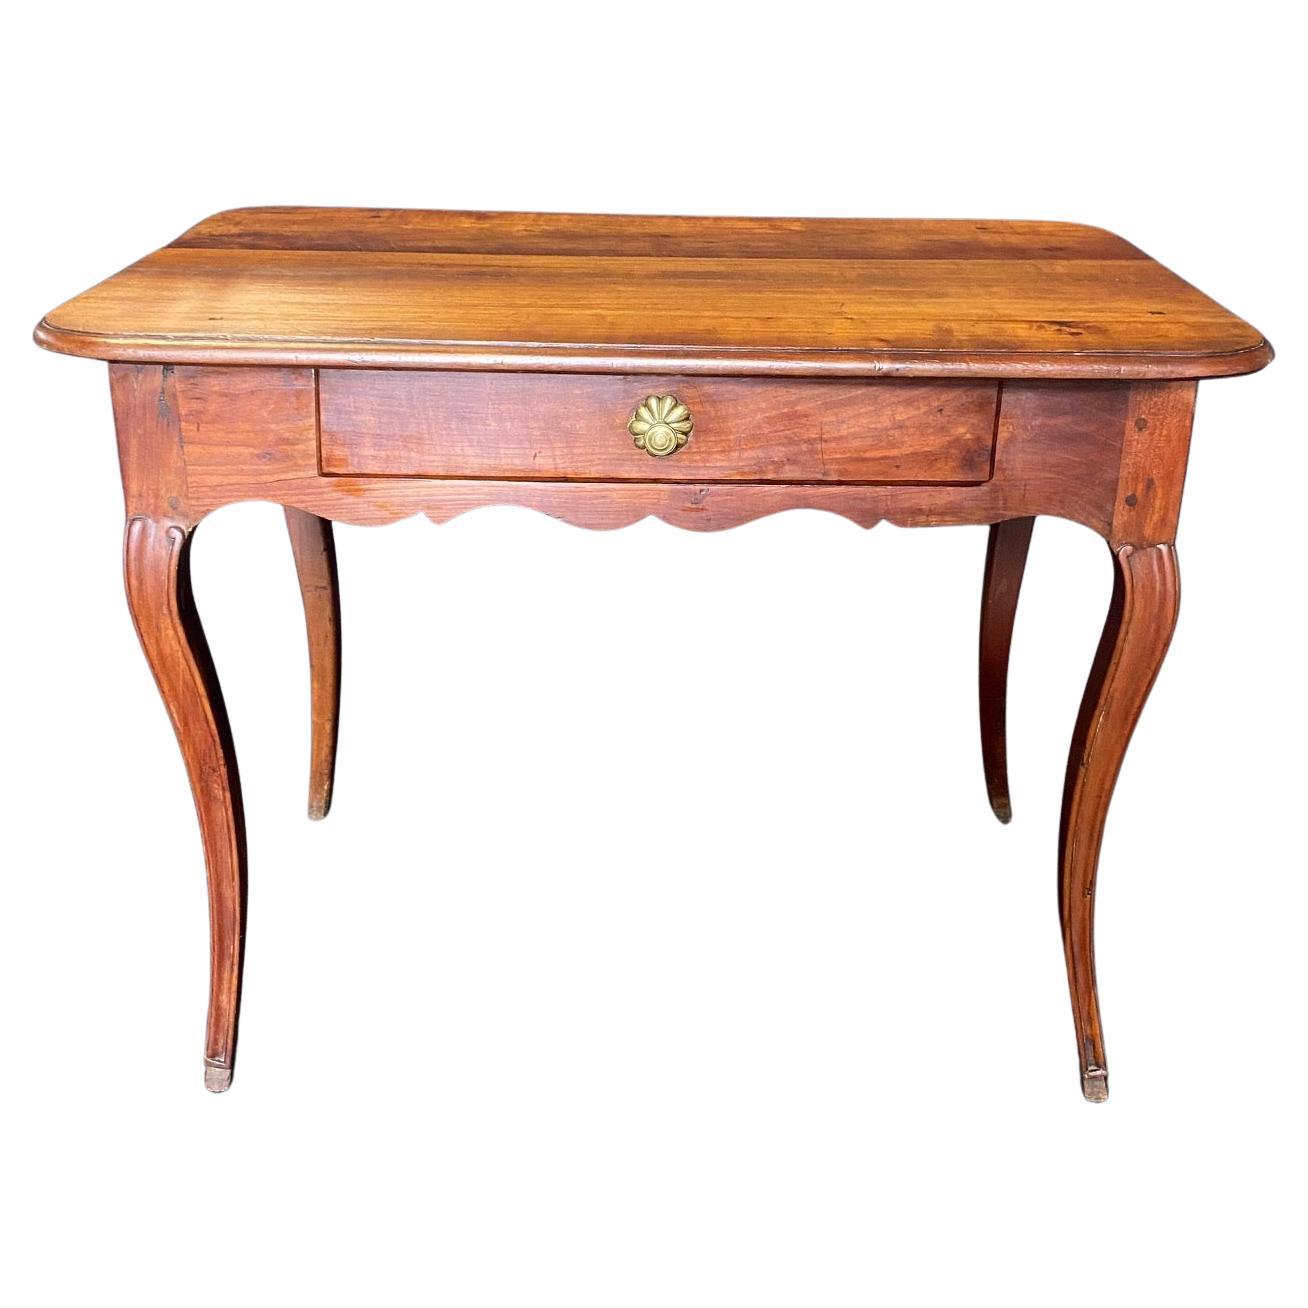 Antique French Provincial Cherry Petite Desk or Side Table with Hoof Feet For Sale